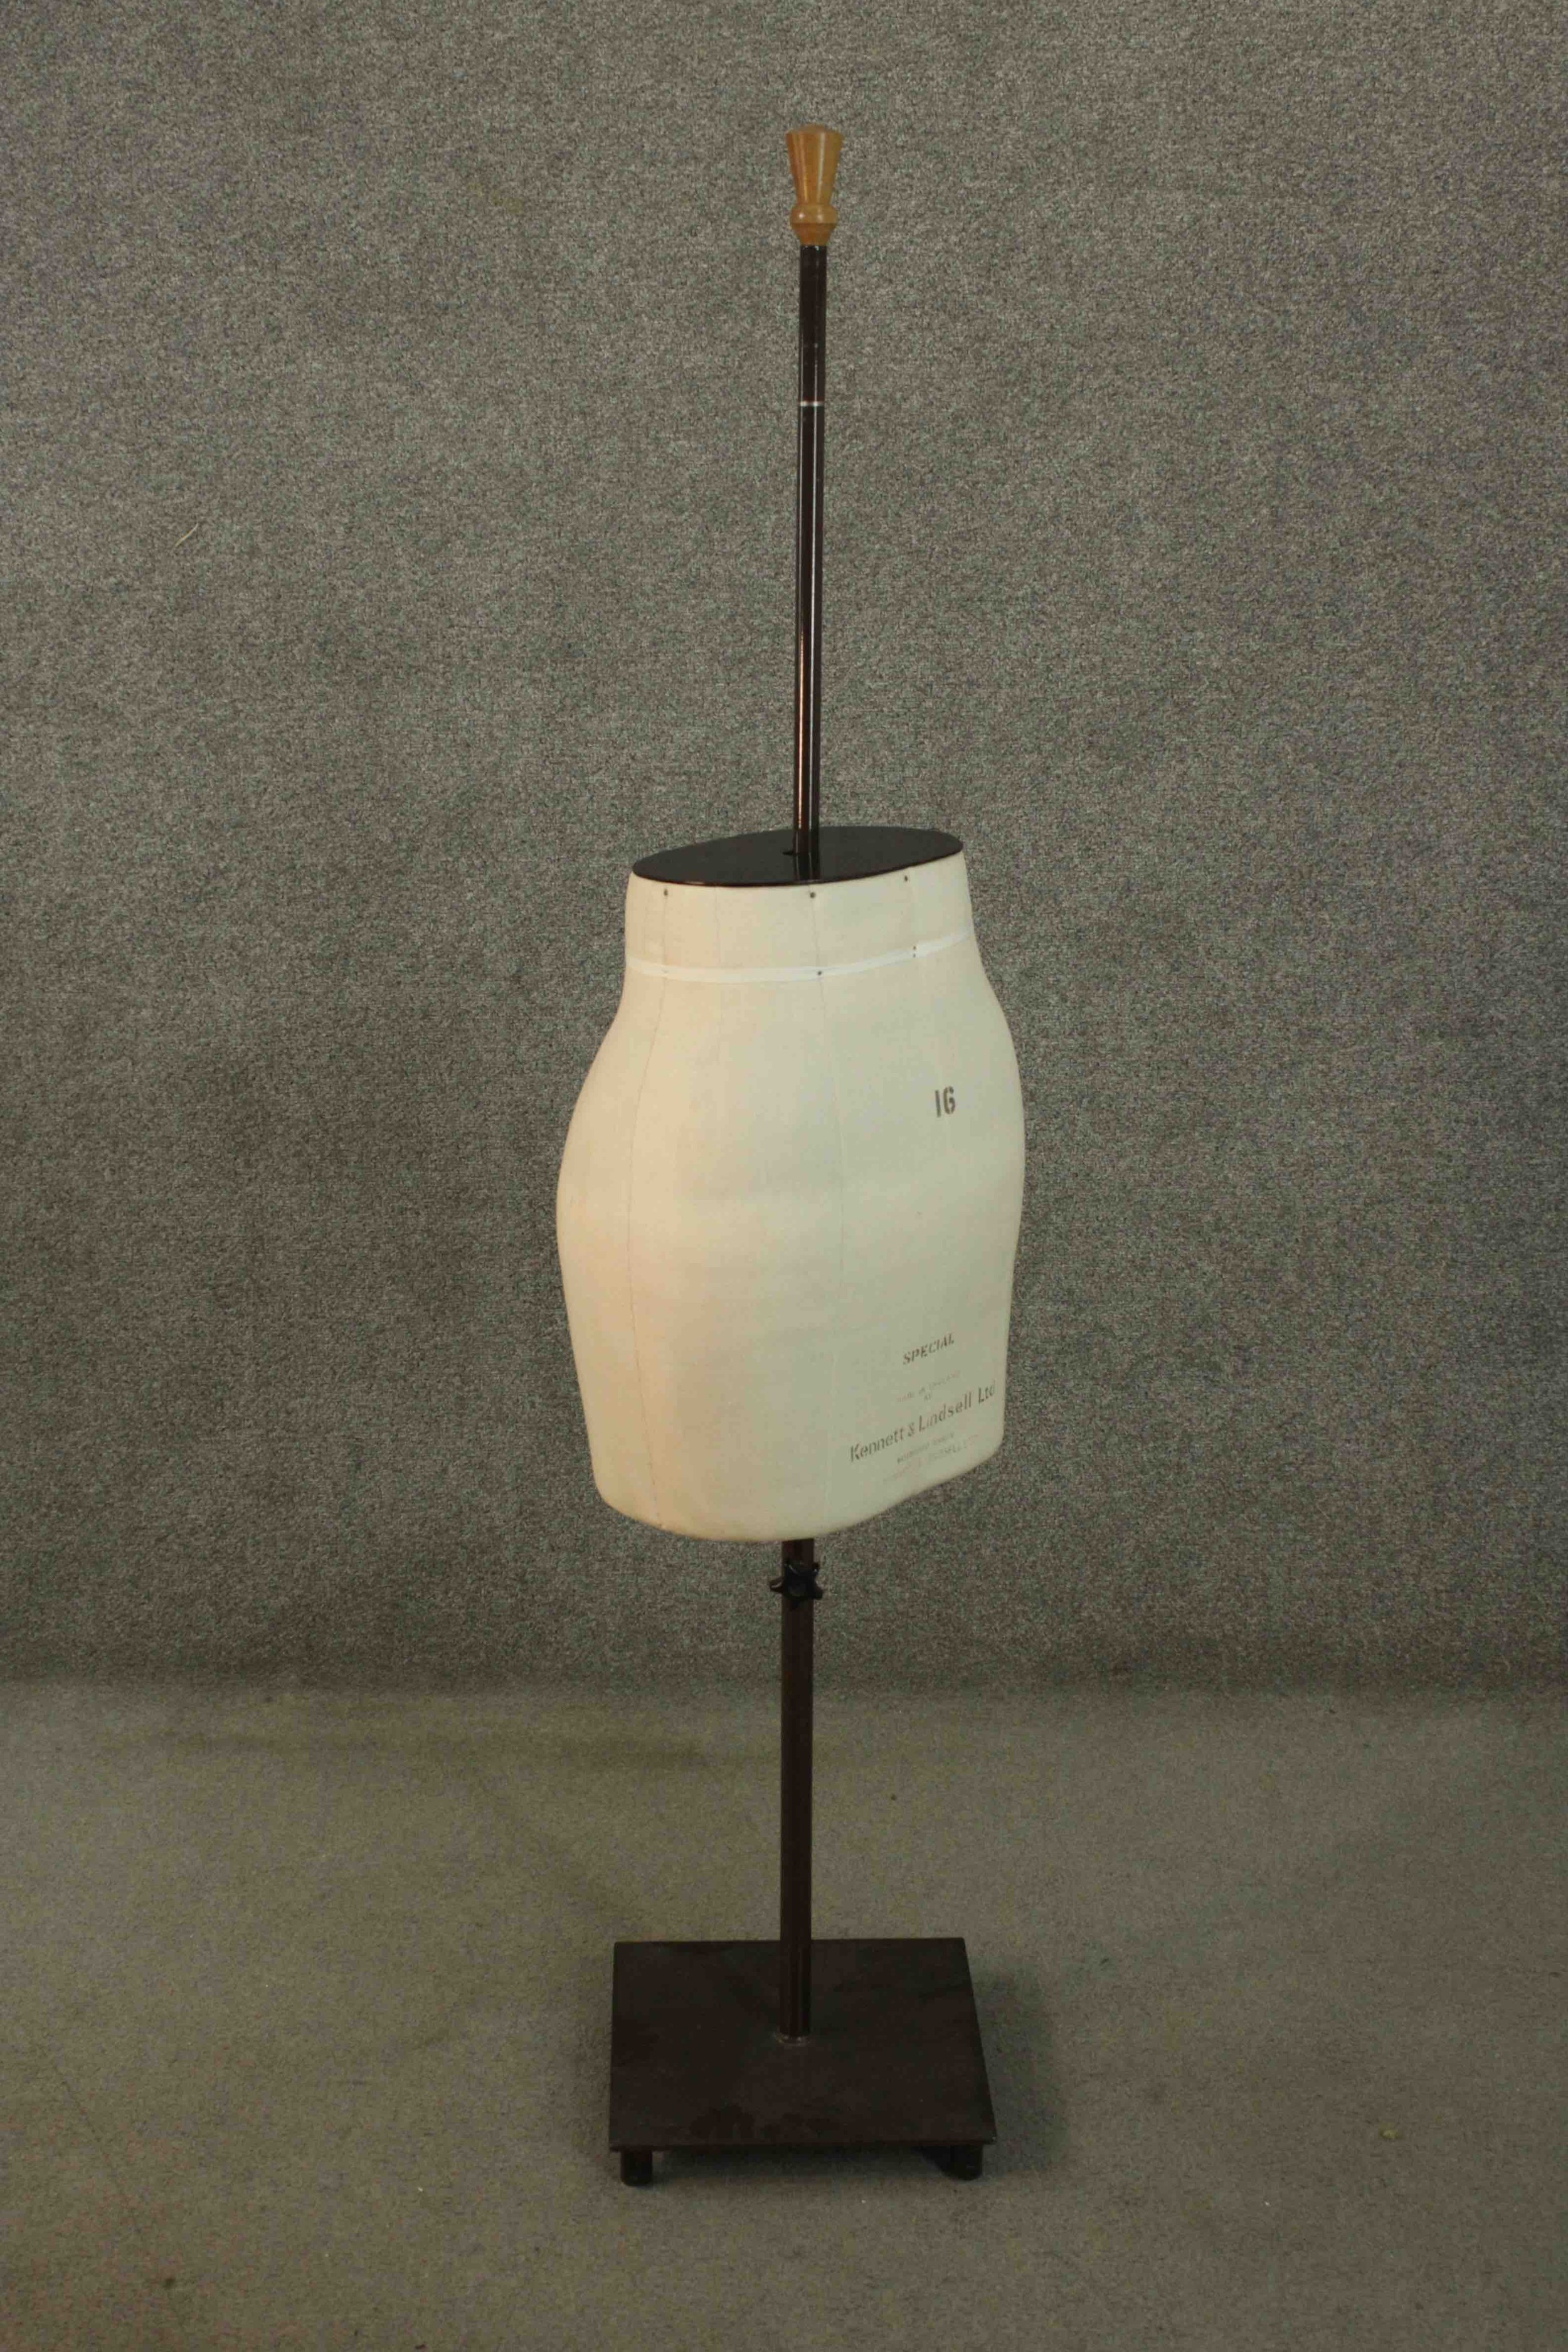 A Kennett & Lindsell Ltd Special size 16 ladies skirt mannequin, on stand. - Image 2 of 3